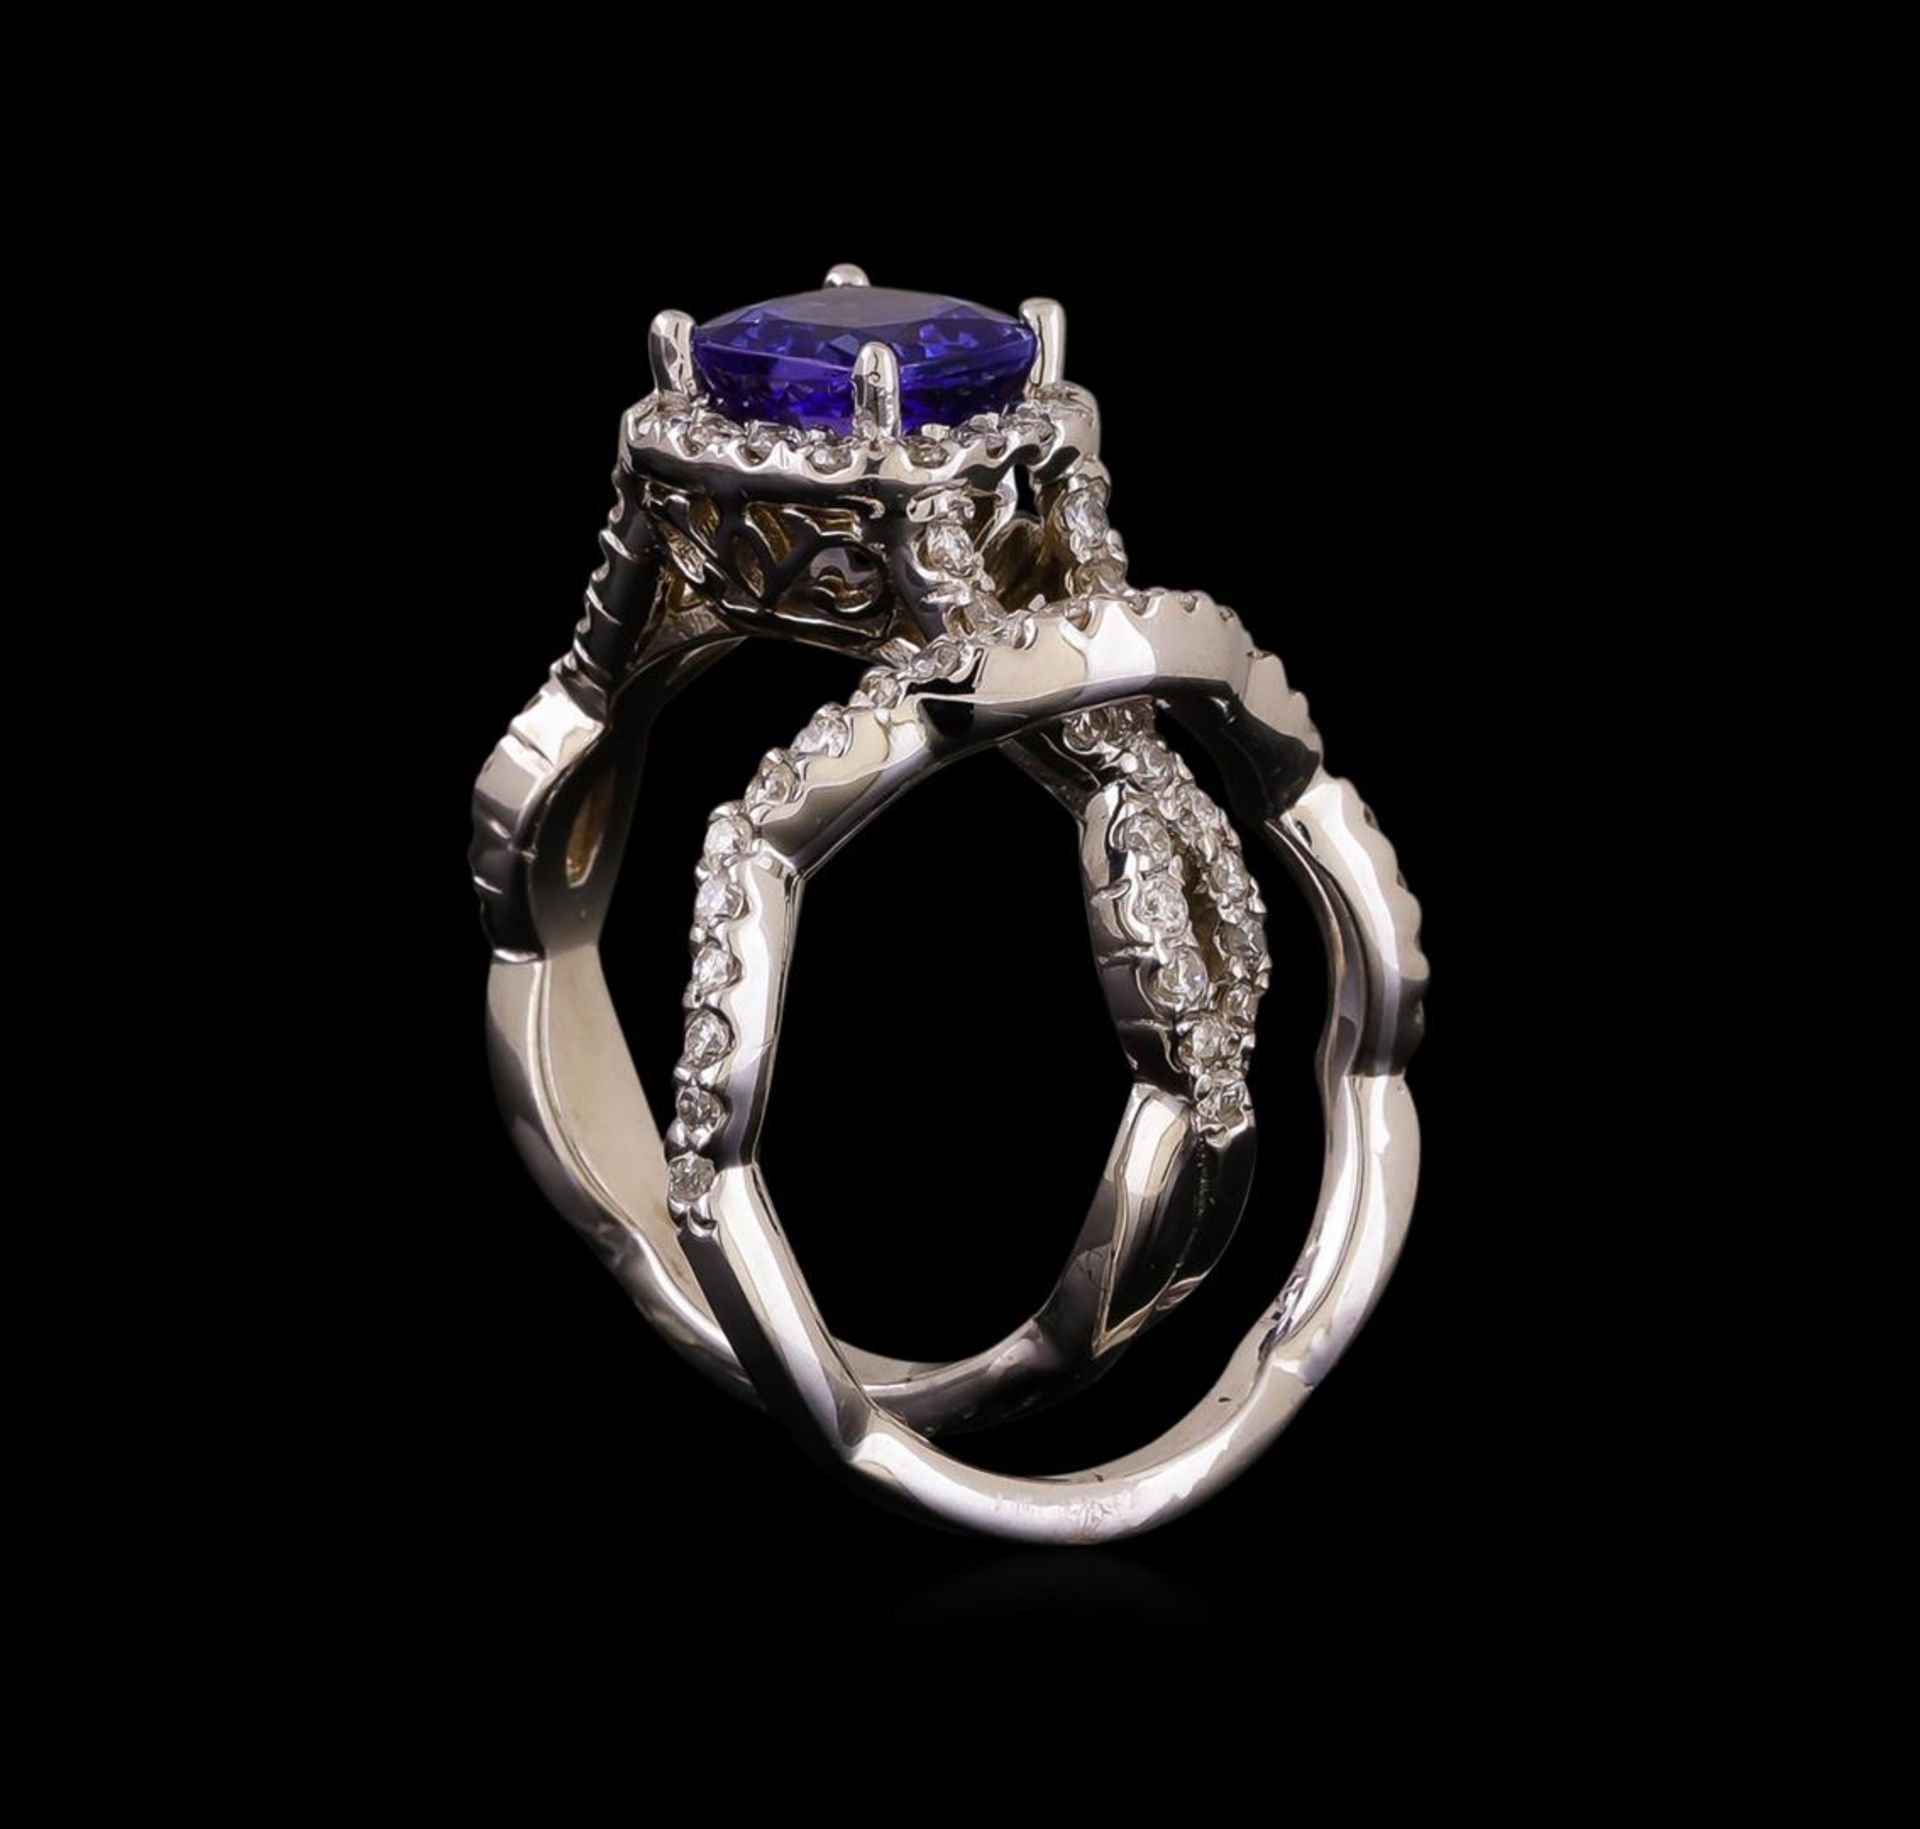 14KT White Gold 1.22 ctw Tanzanite and Diamond Ring and Guard - Image 3 of 4